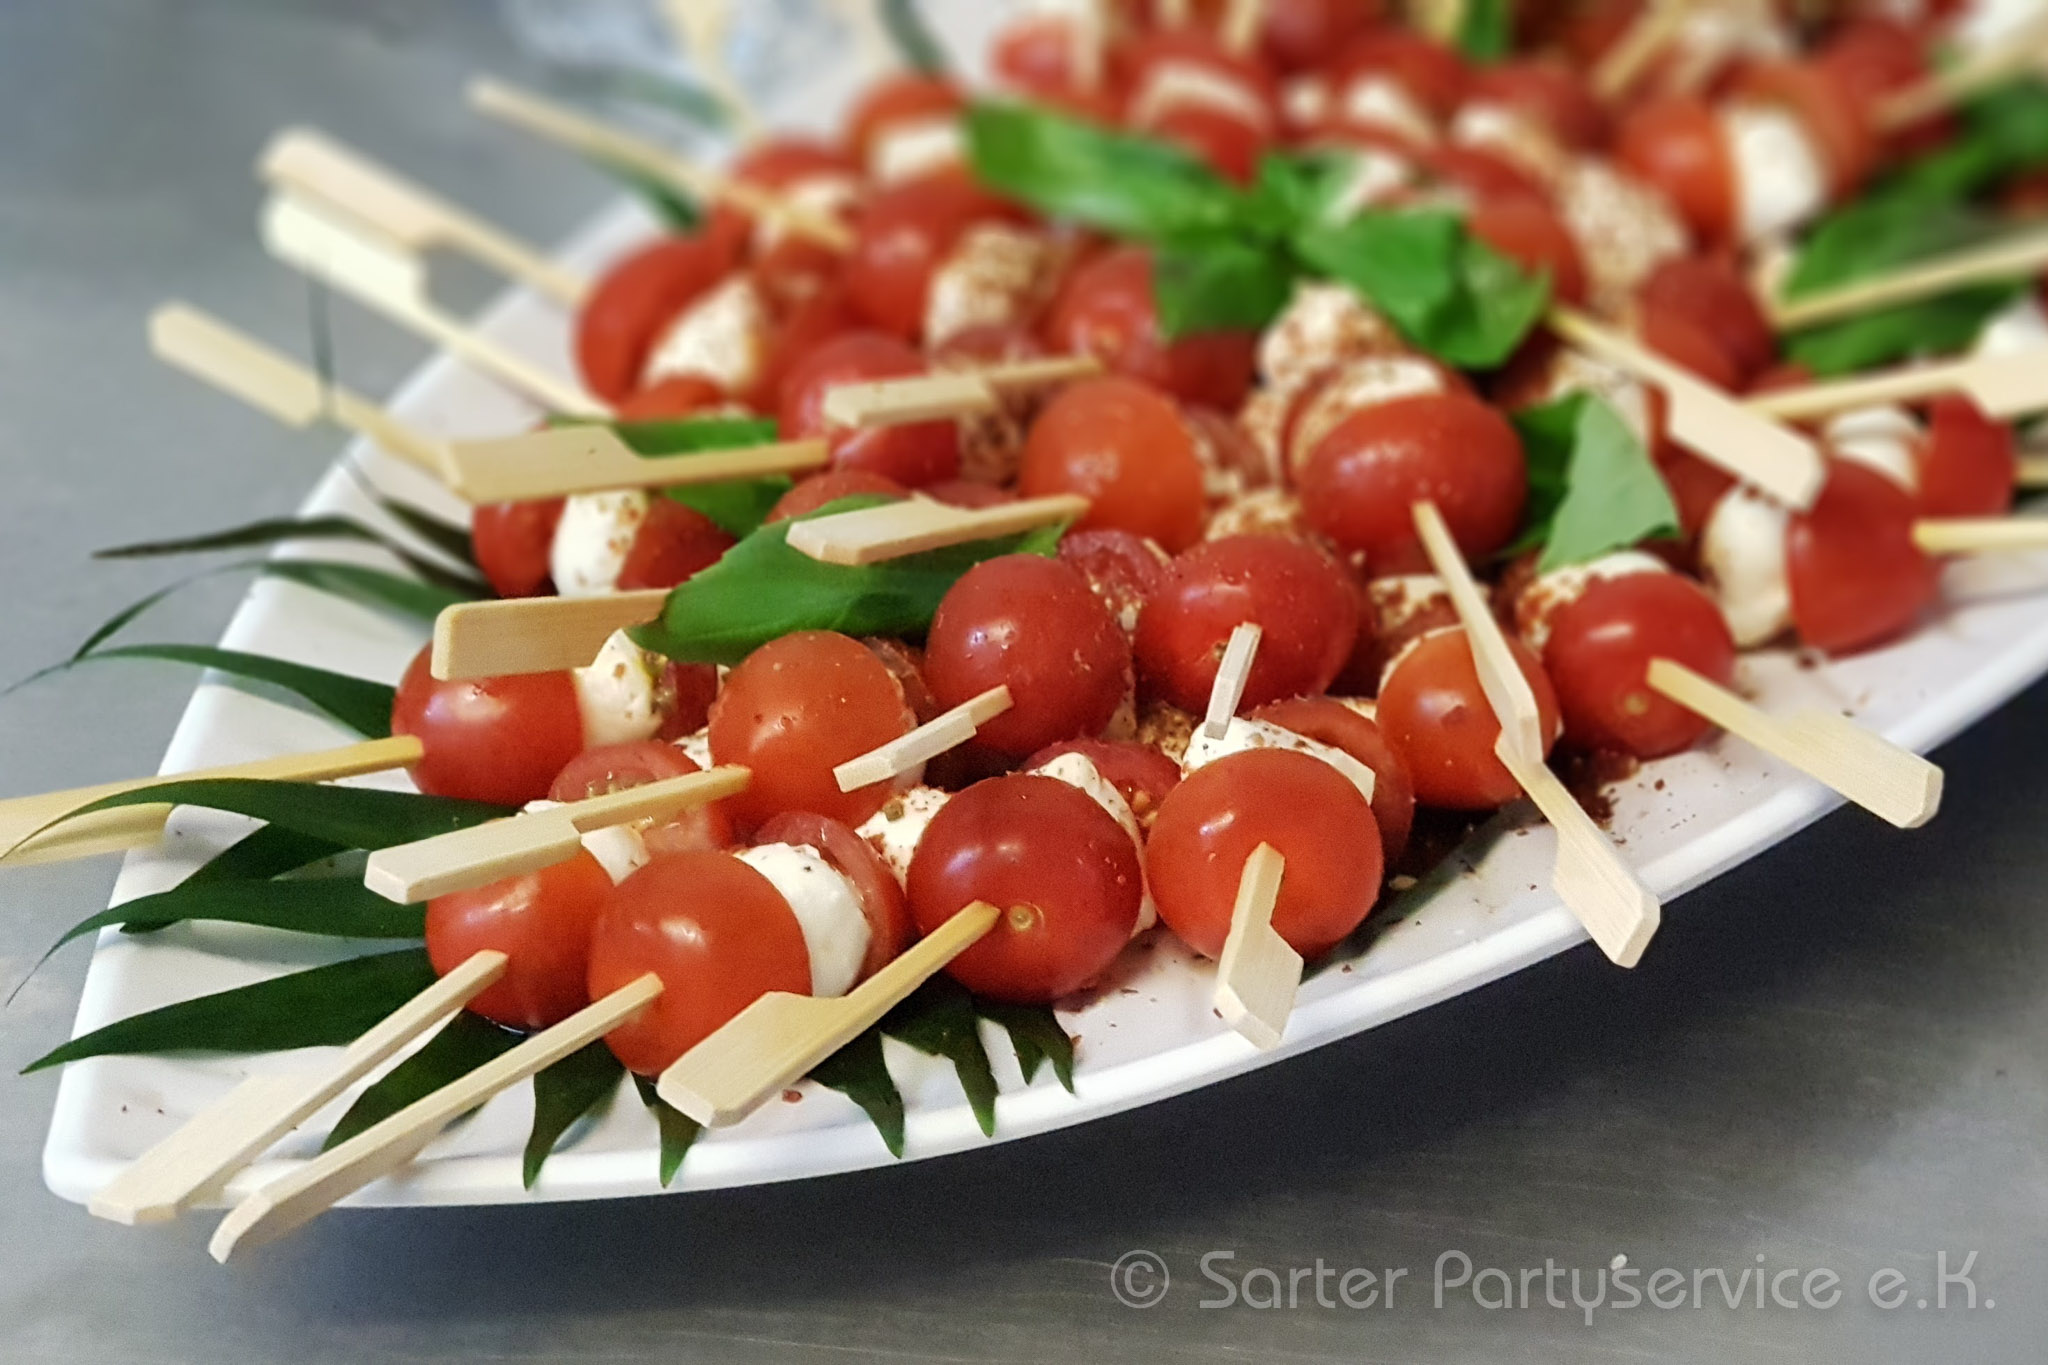 Partyservice-Bonn-Catering-Sarter-172623